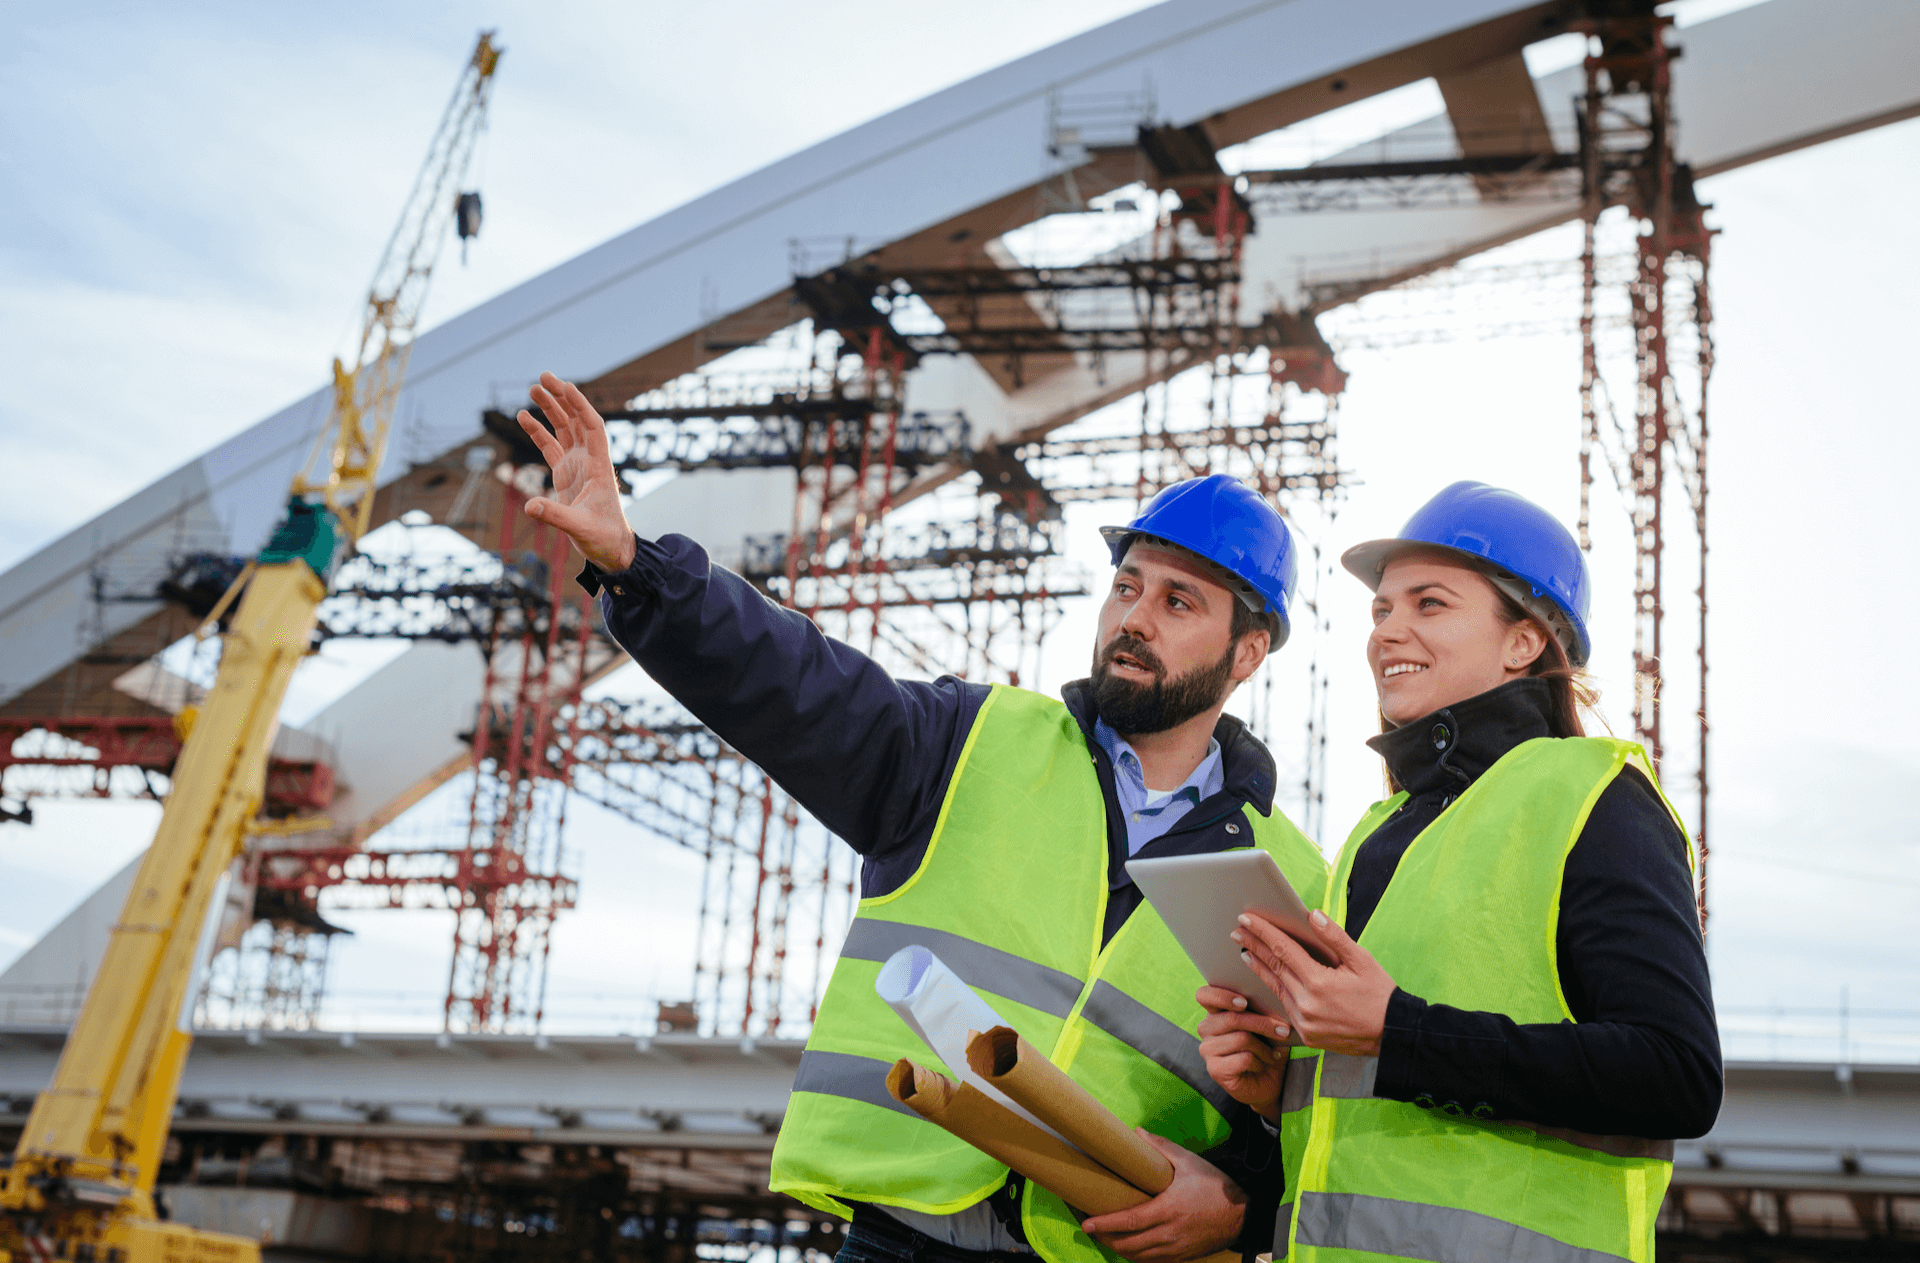 A man and women on a worksite outside. The man is pointing and explaining what he is gesturing towards to the woman.